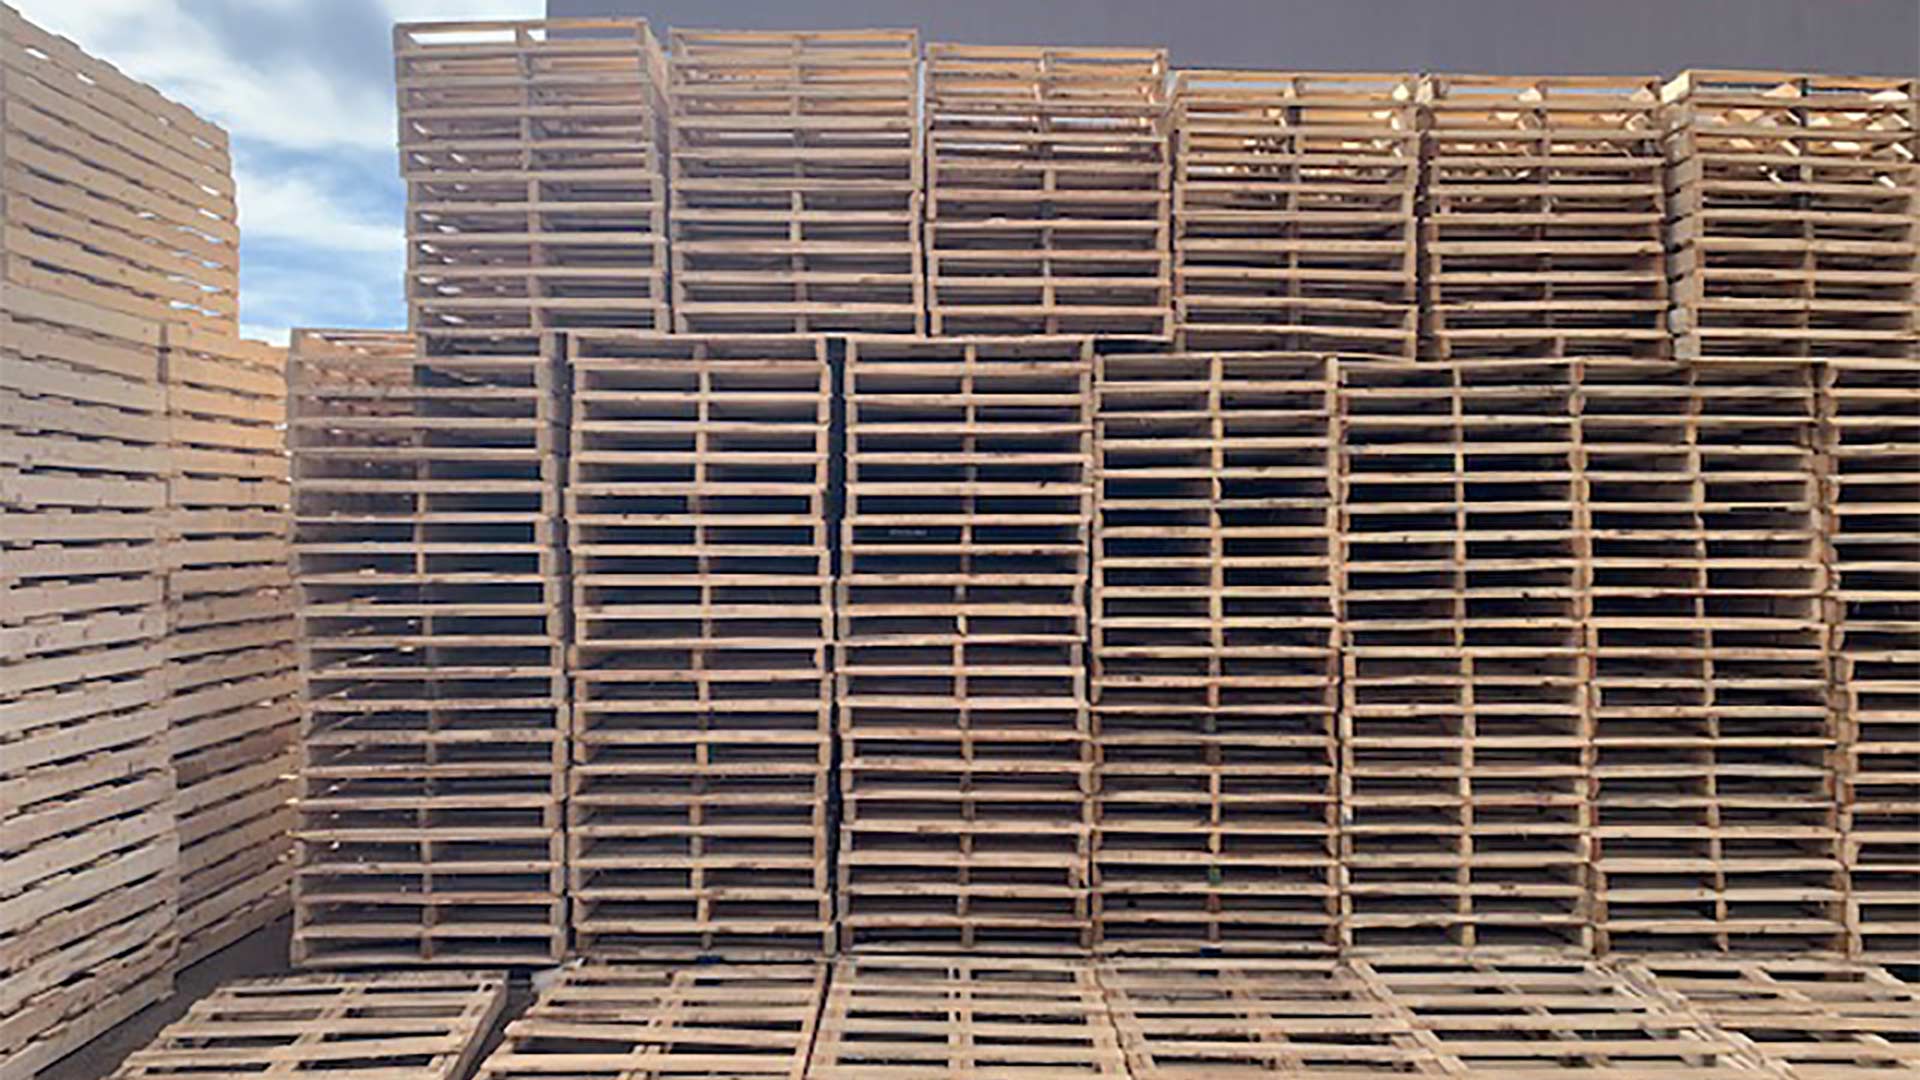 Pallet Company in Phoenix, Arizona with New Pallets for Sale